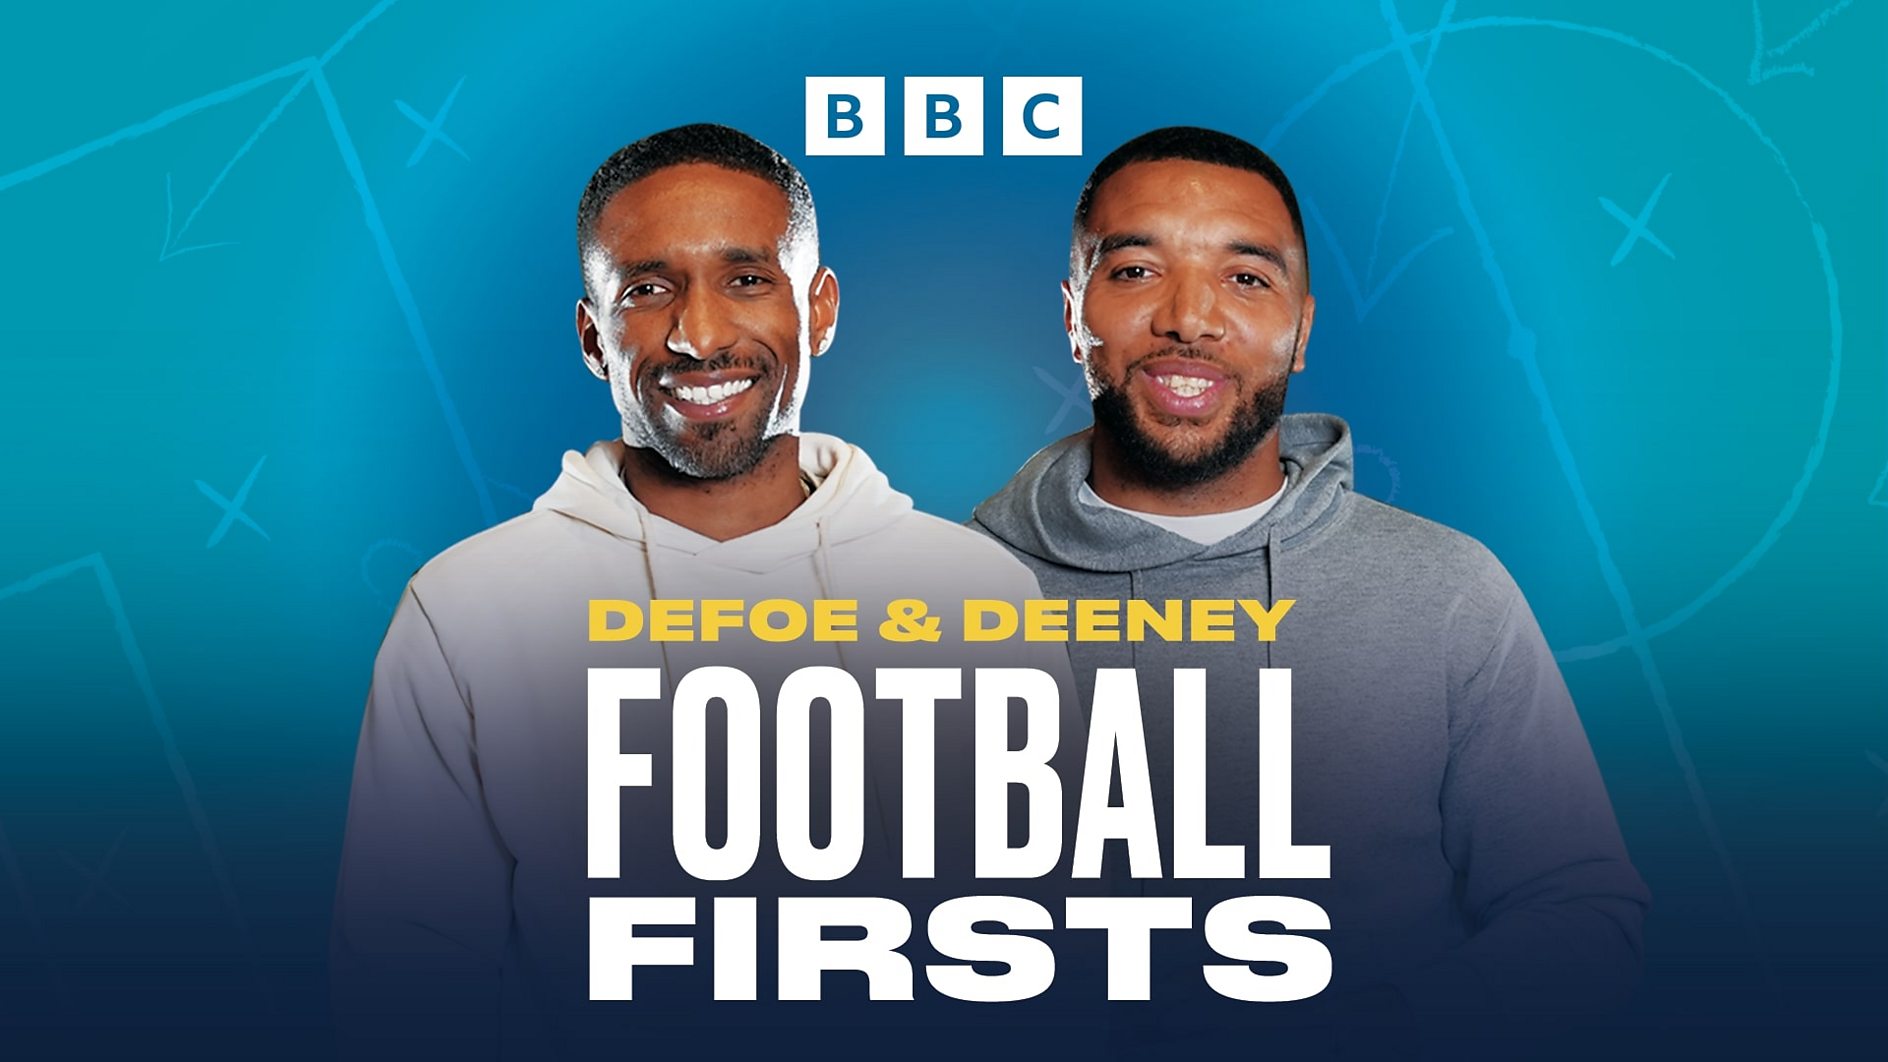 Jermain Defoe and Troy Deeney return with series two of BBC 5 Live podcast Football Firsts